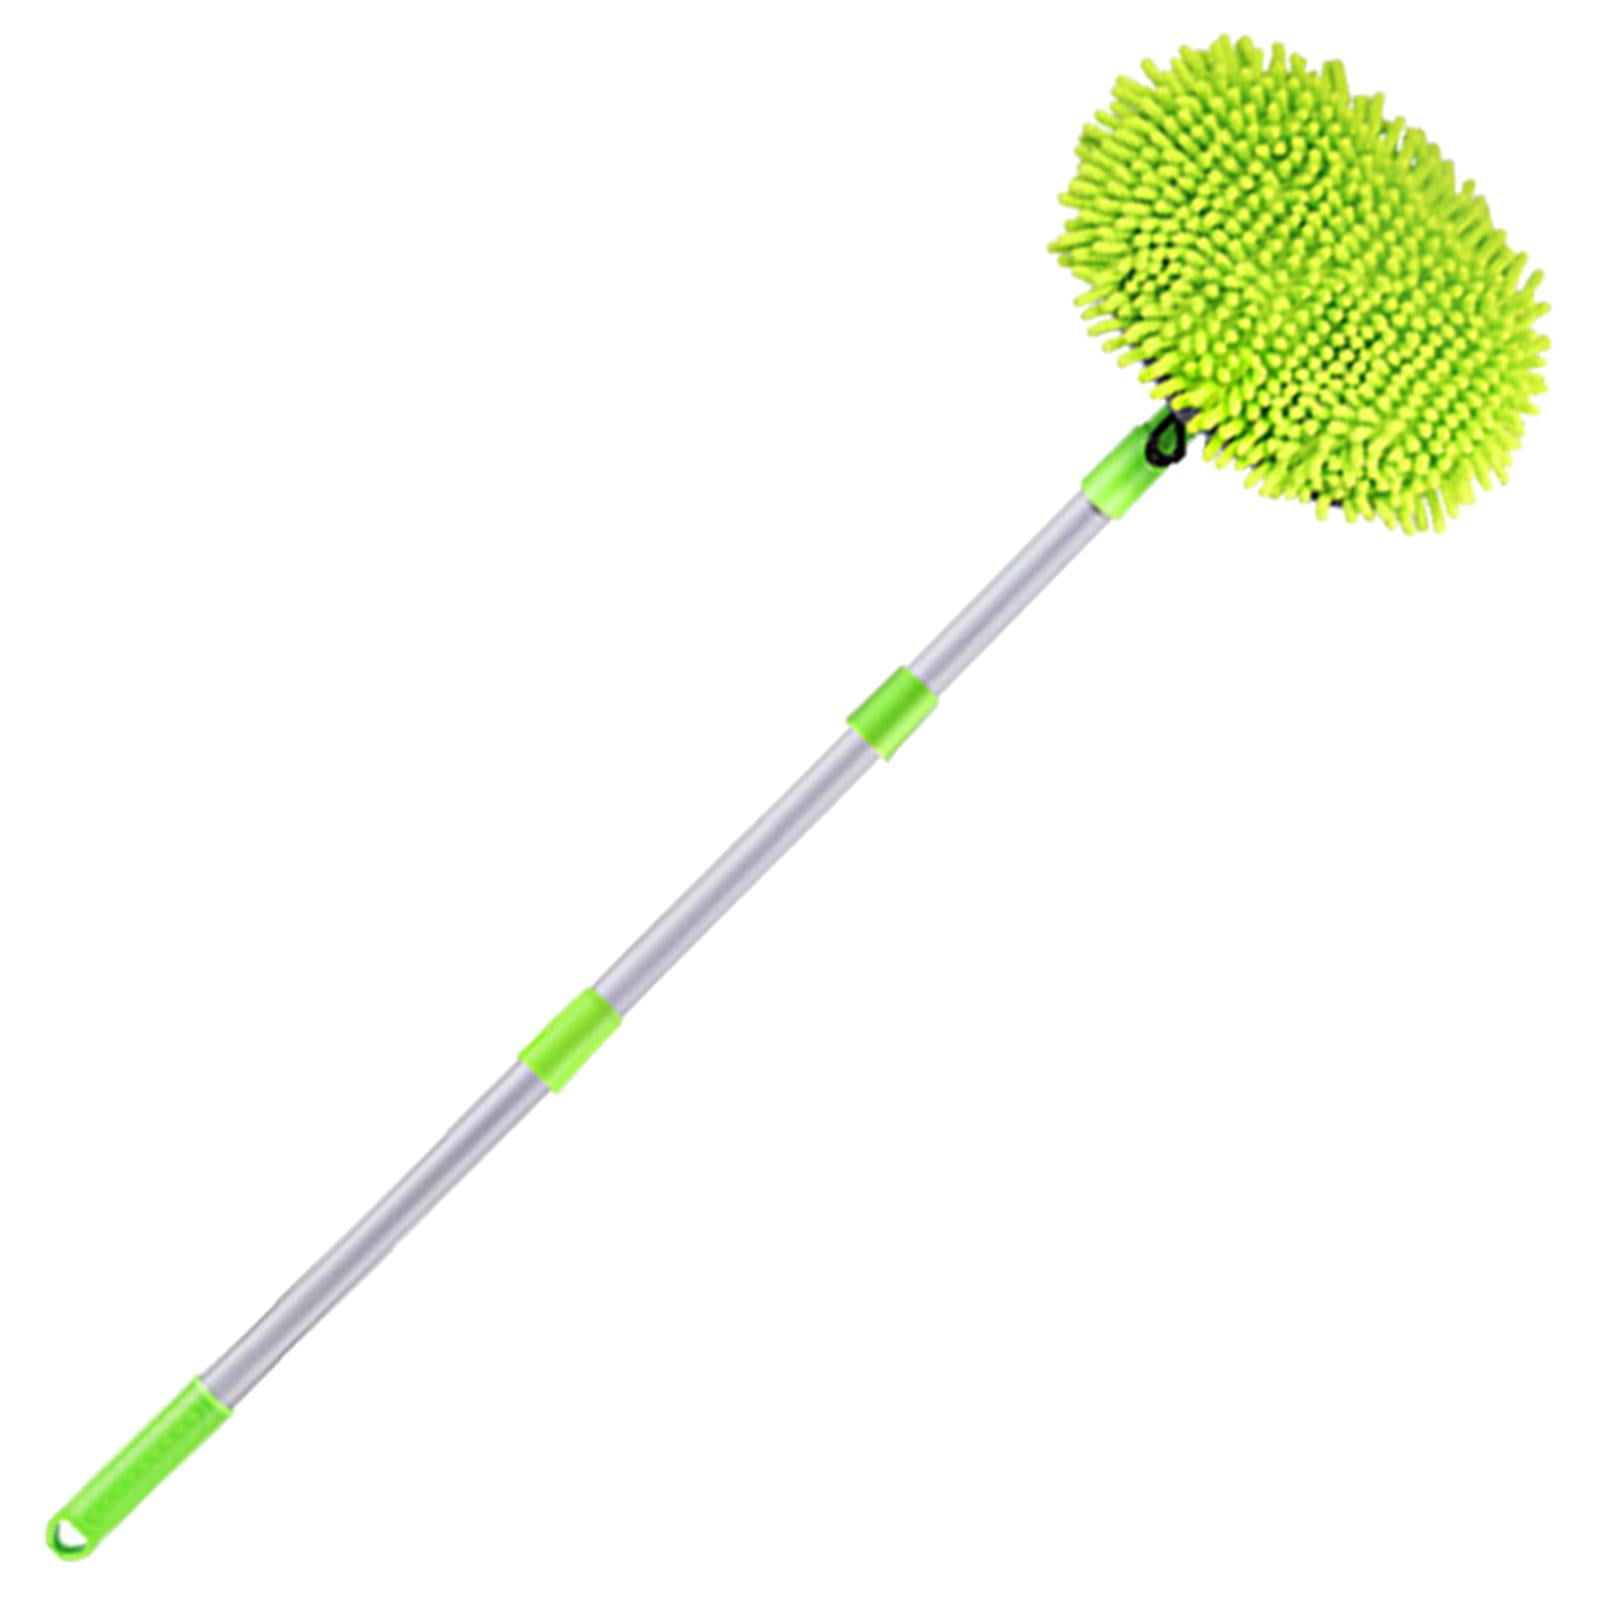 Autoclave Cleaning Brush Kit Contains Telescopic Handle Extends